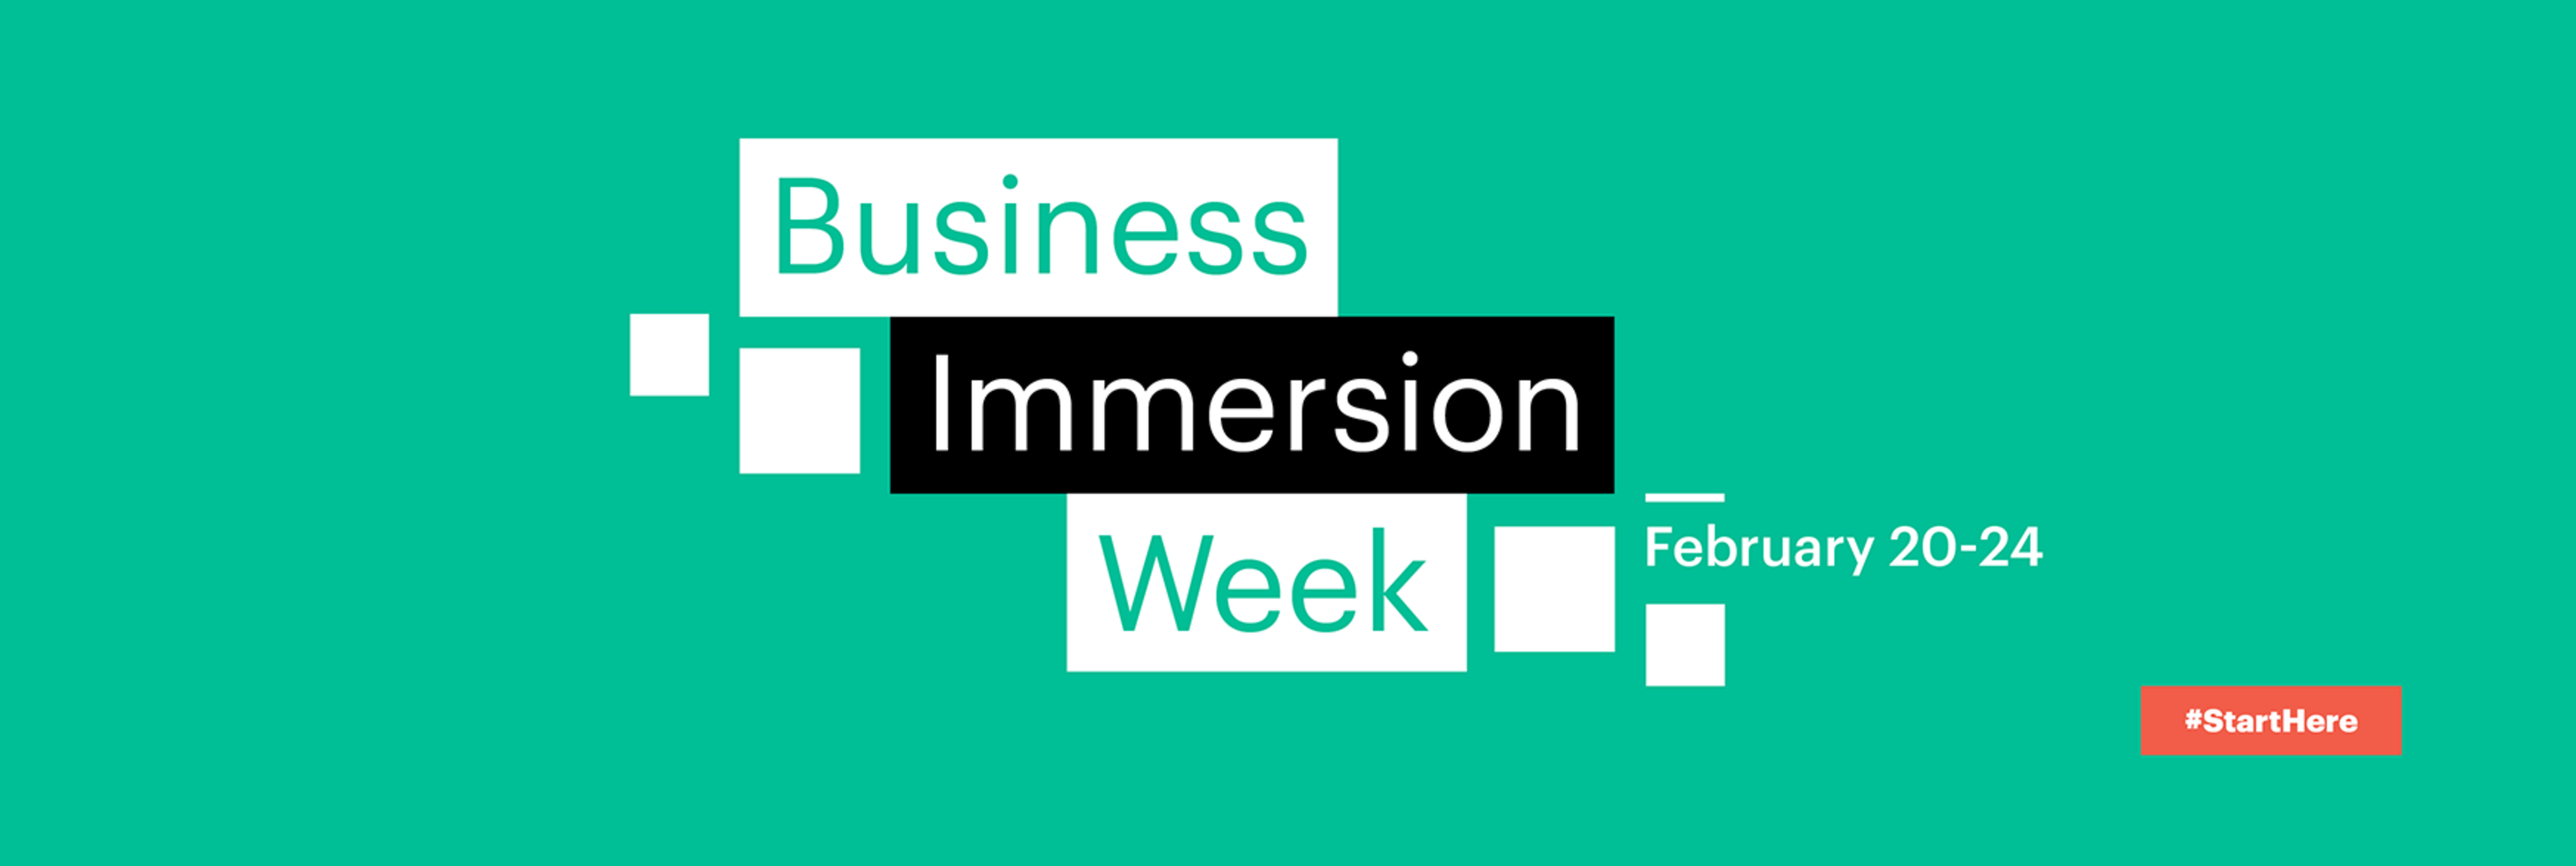 Business Immersion Week